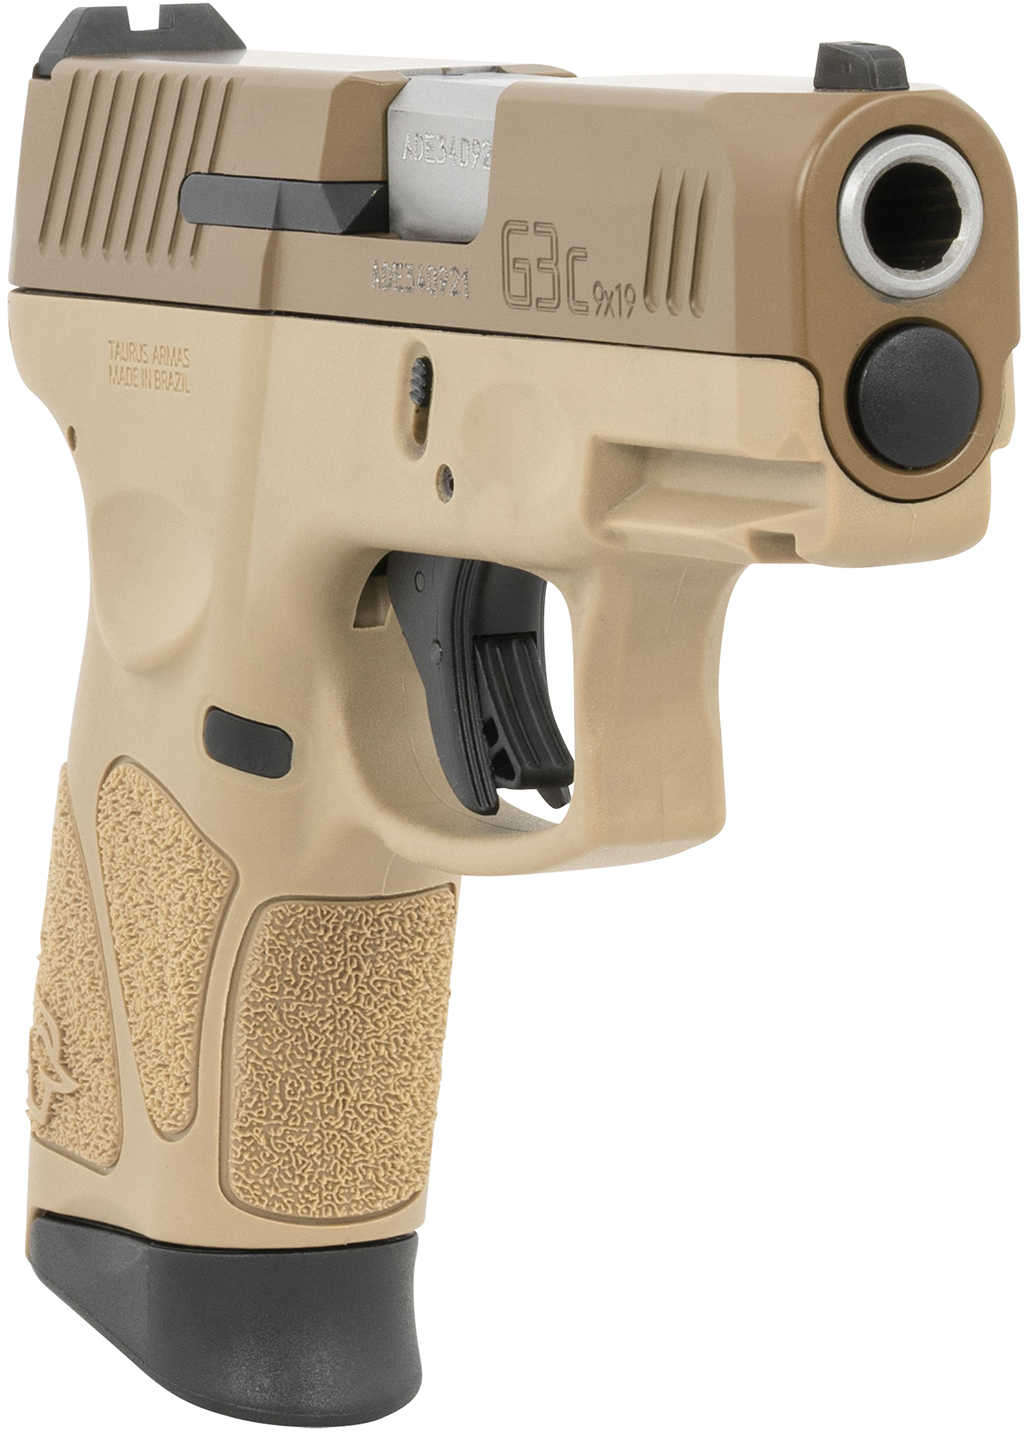 Taurus G3c Single Action Only Semi-Automatic Pistol 9mm Luger 3.2" Stainless Steel Barrel (3)-12Rd Magazine Fixed Front & Adjustable Rear Sights Coyote Cerakote Finish